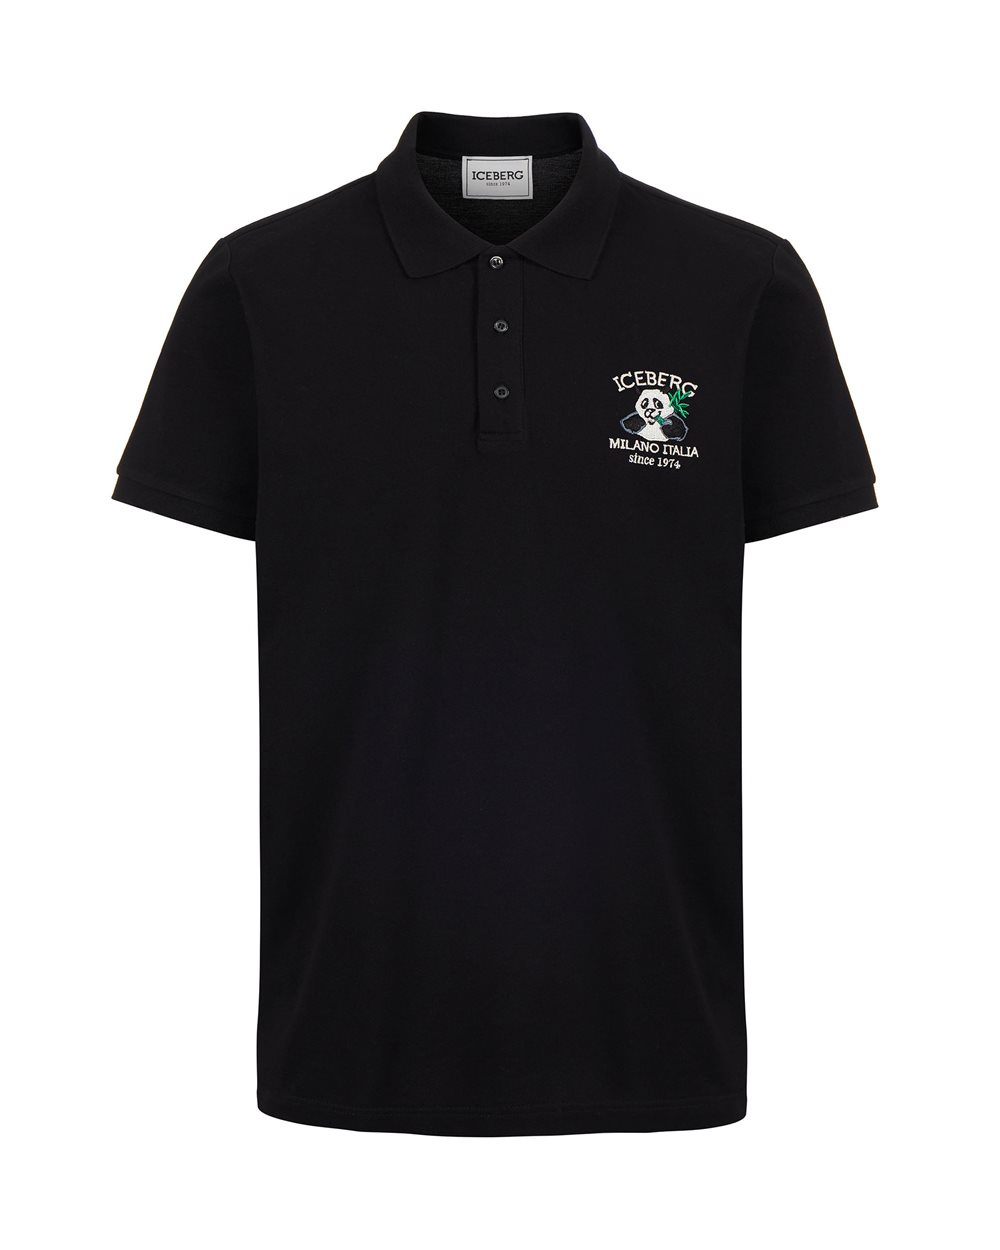 Polo shirt with cartoon graphics and logo - Clothing | Iceberg - Official Website